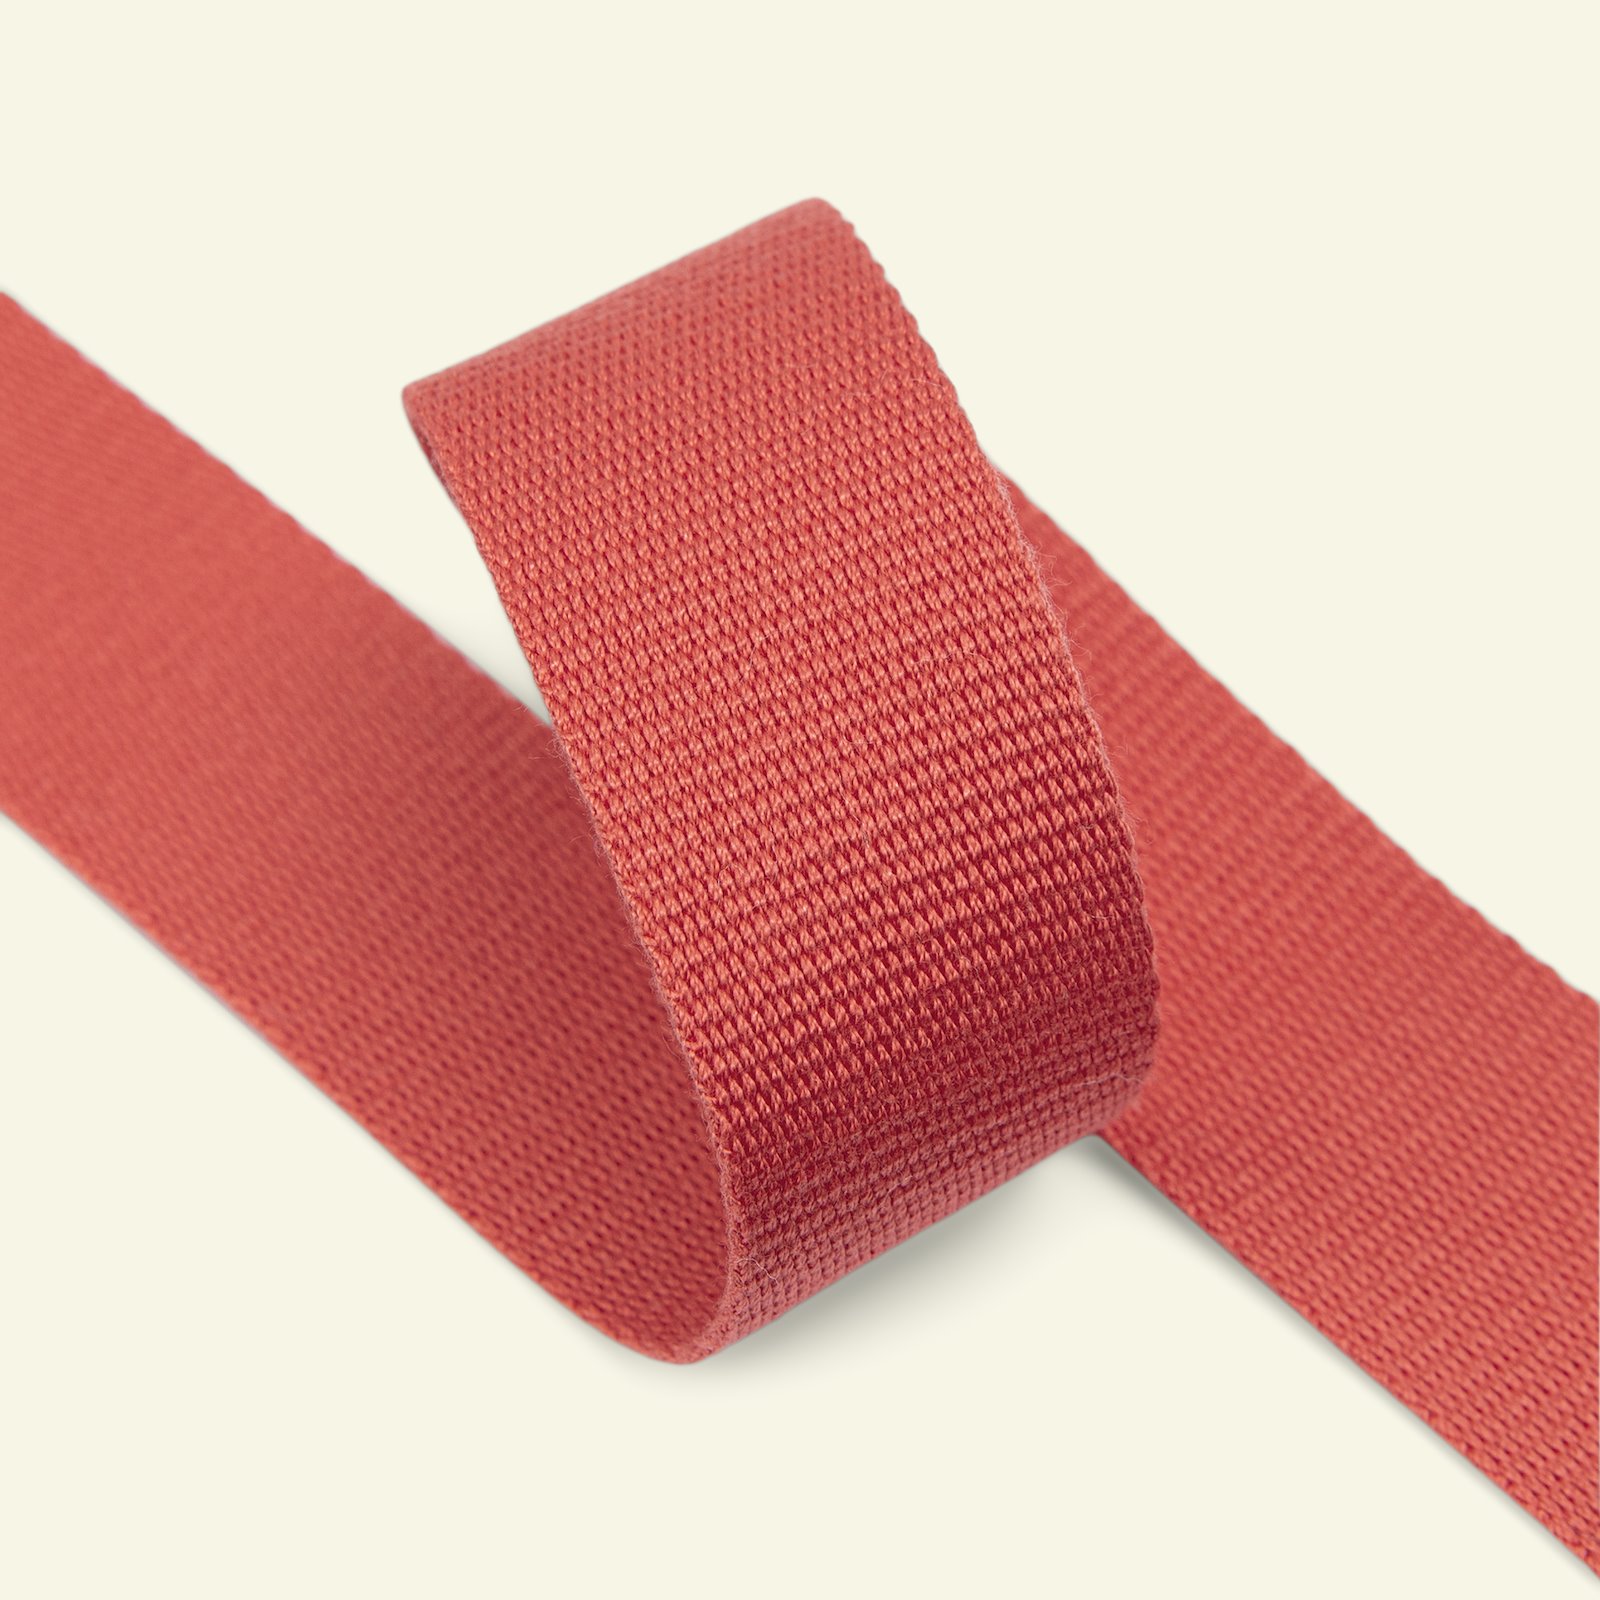 https://media.selfmade.com/images/ribbon-woven-32mm-red-3m-22505-pack-png.jpg?width=1600&height=1600&i=68673&ud=abaoqo172gg